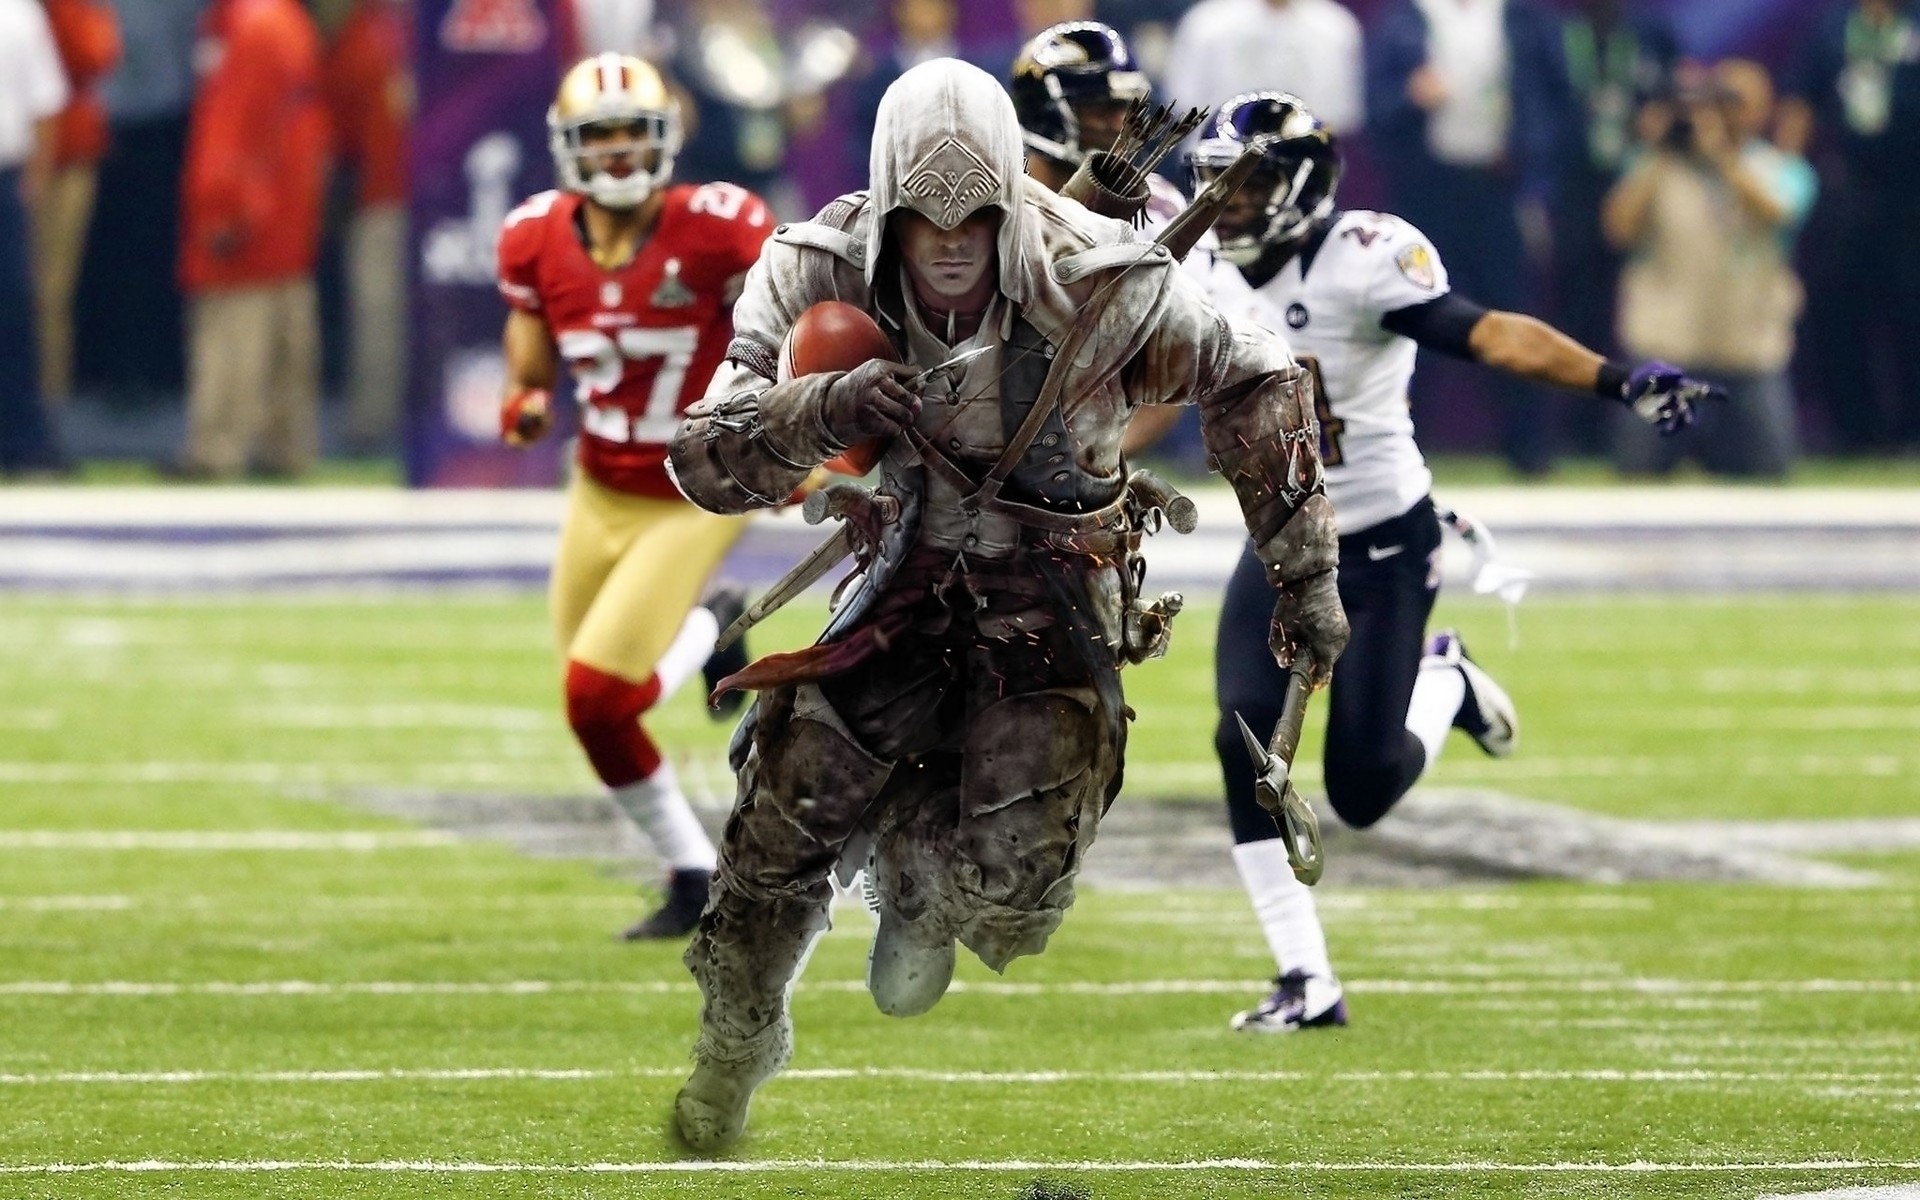 1920x1200 Assassin's Creed 4 Super Bowl Wallpapers